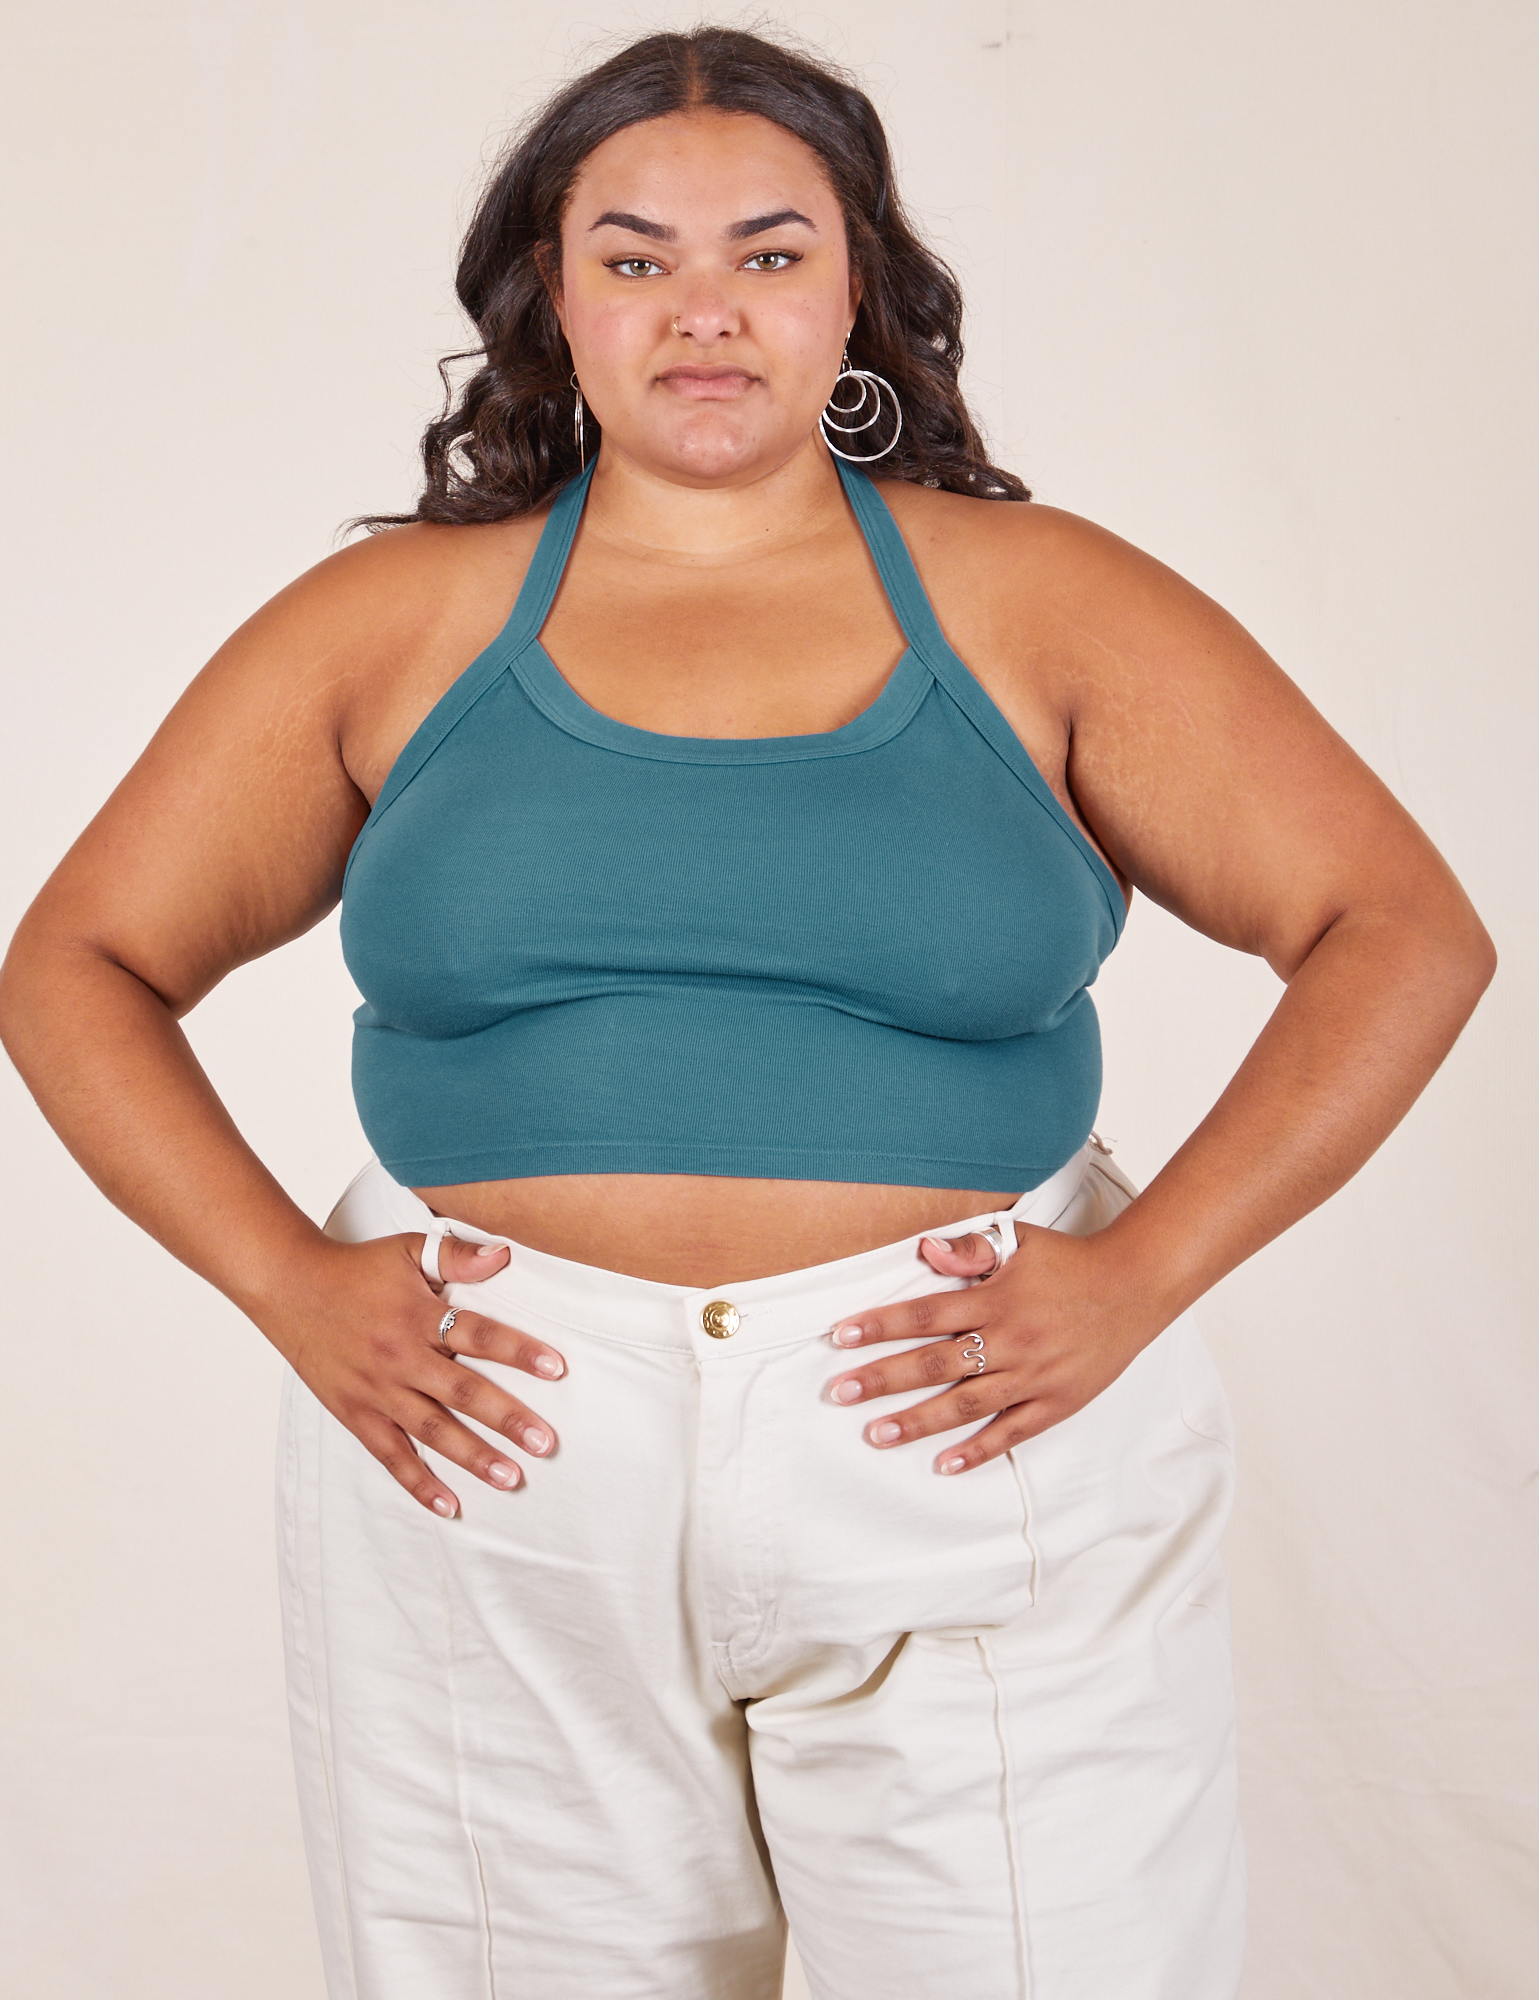 Alicia is 5&#39;9&quot; and wearing XL Halter Top in Marine Blue paired with vintage off-white Western Pants